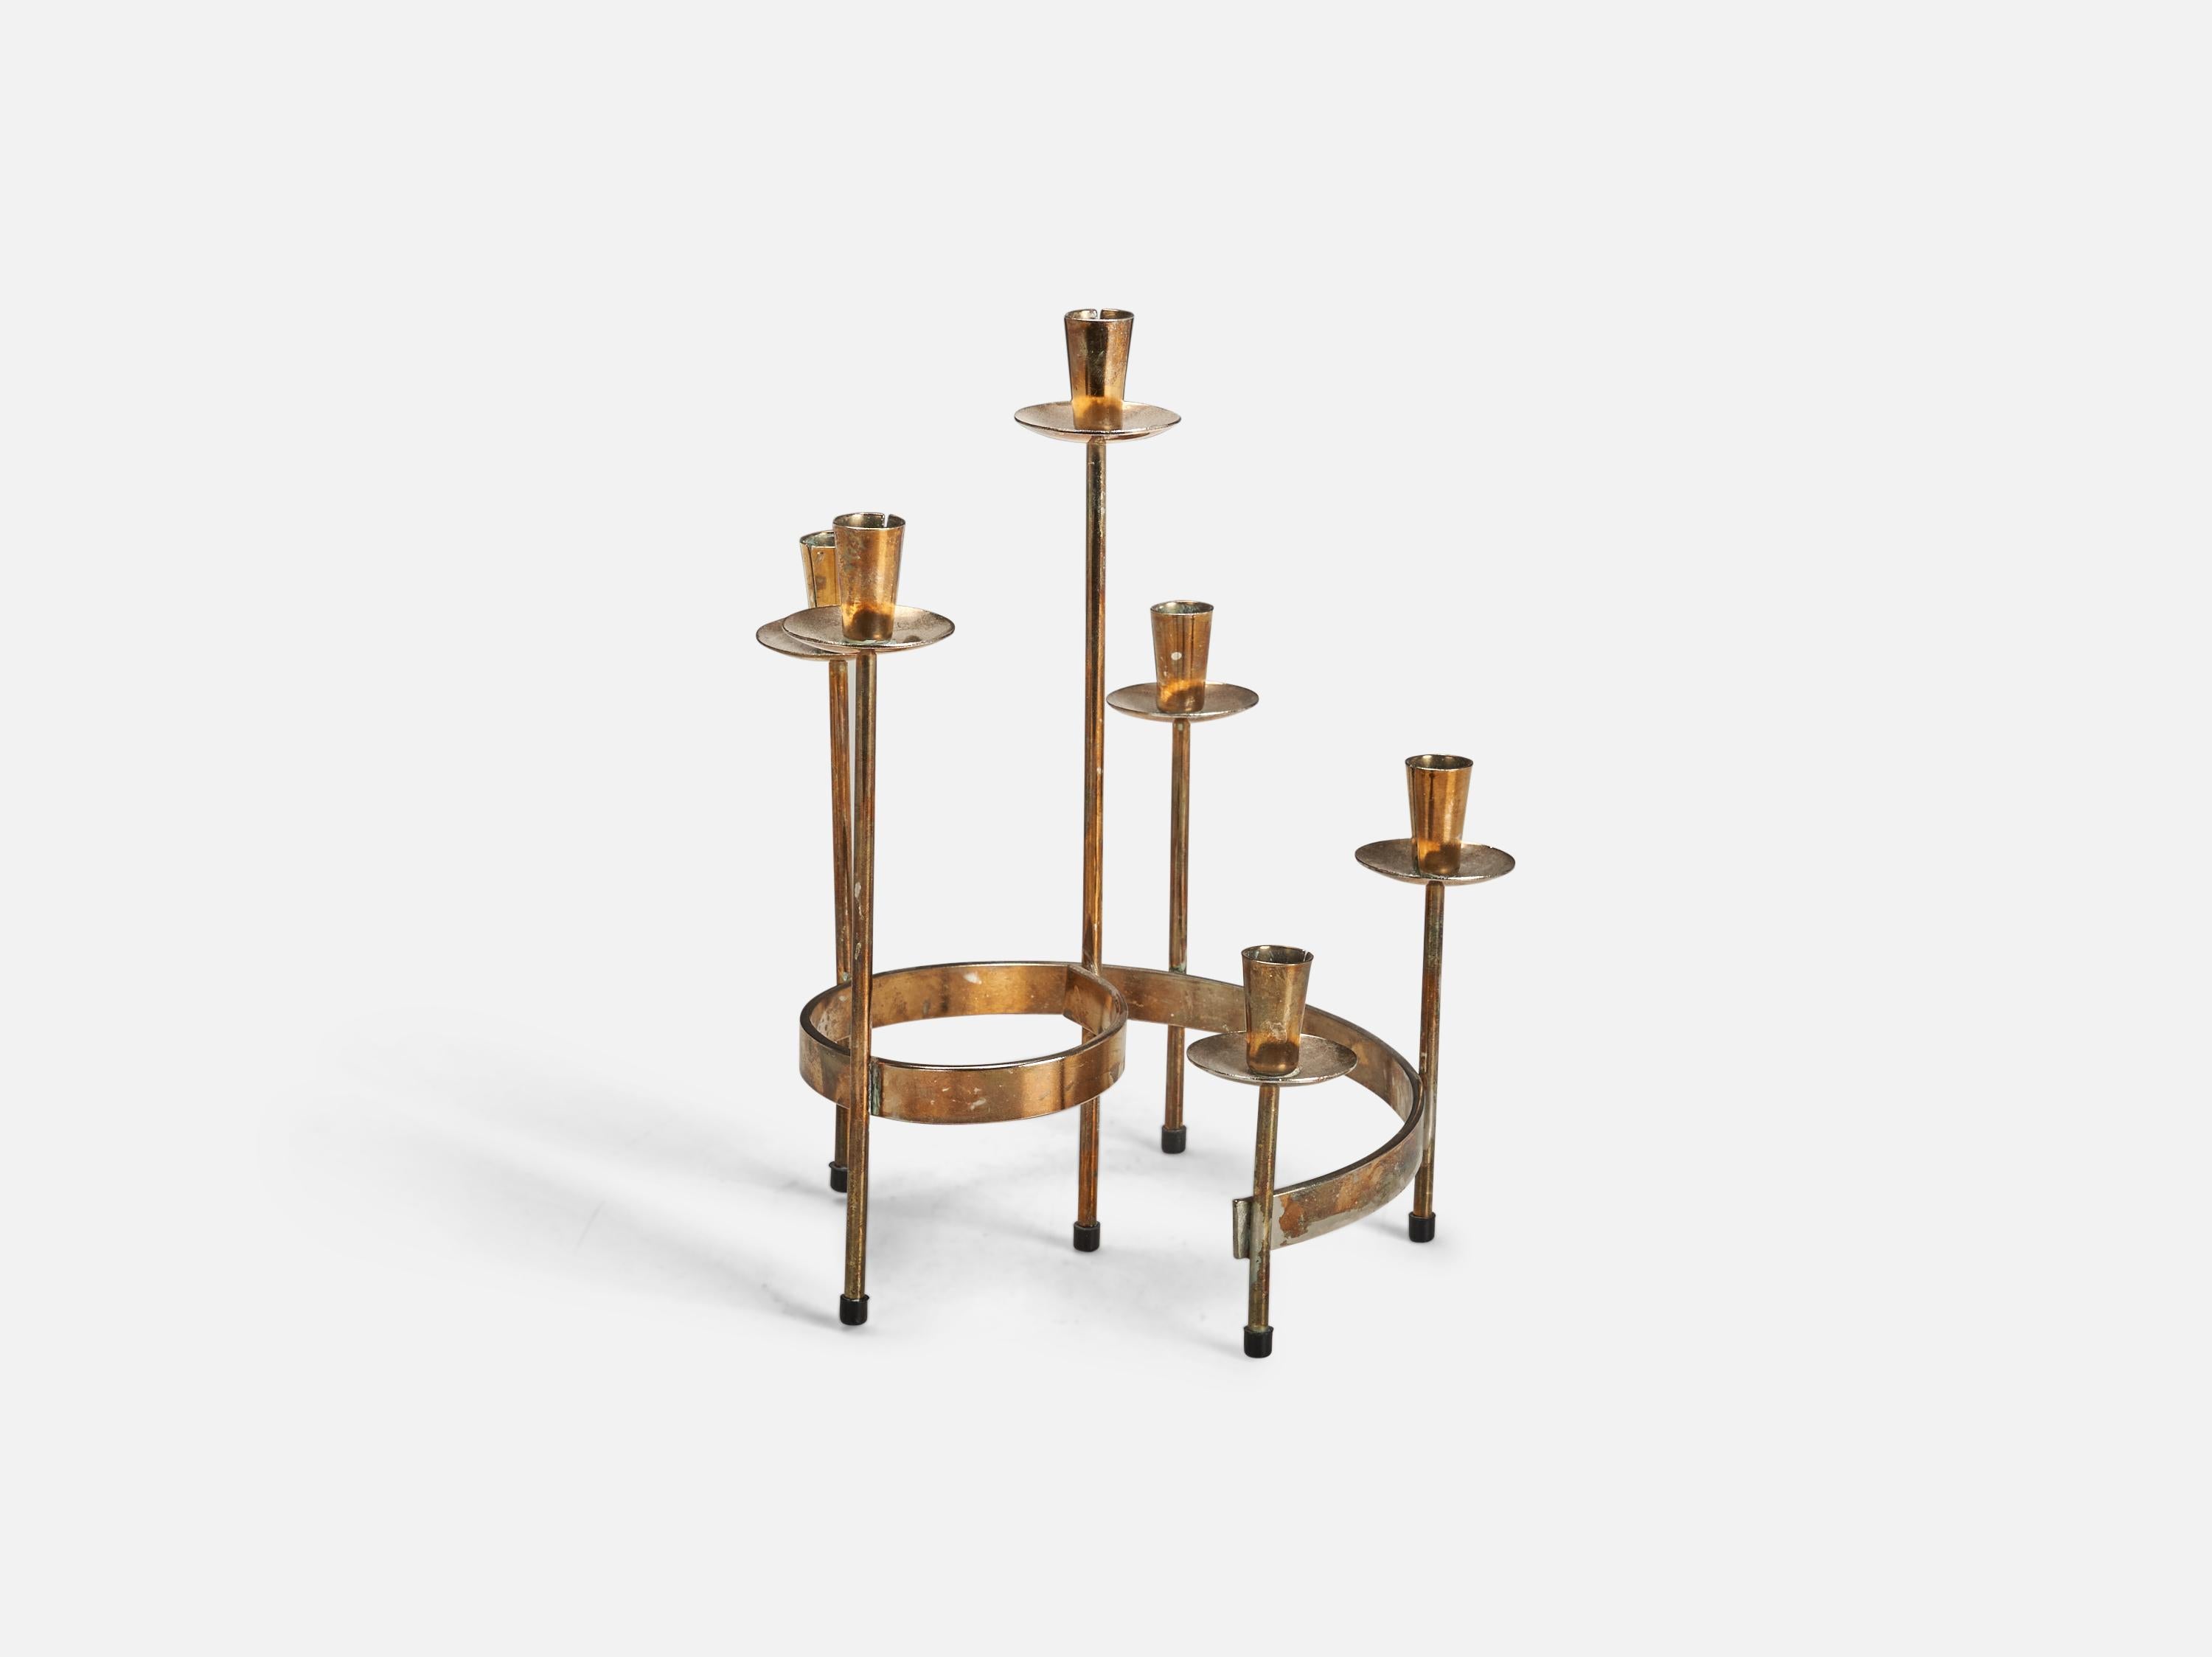 A brass candelabra designed and produced in Sweden, 1950s.